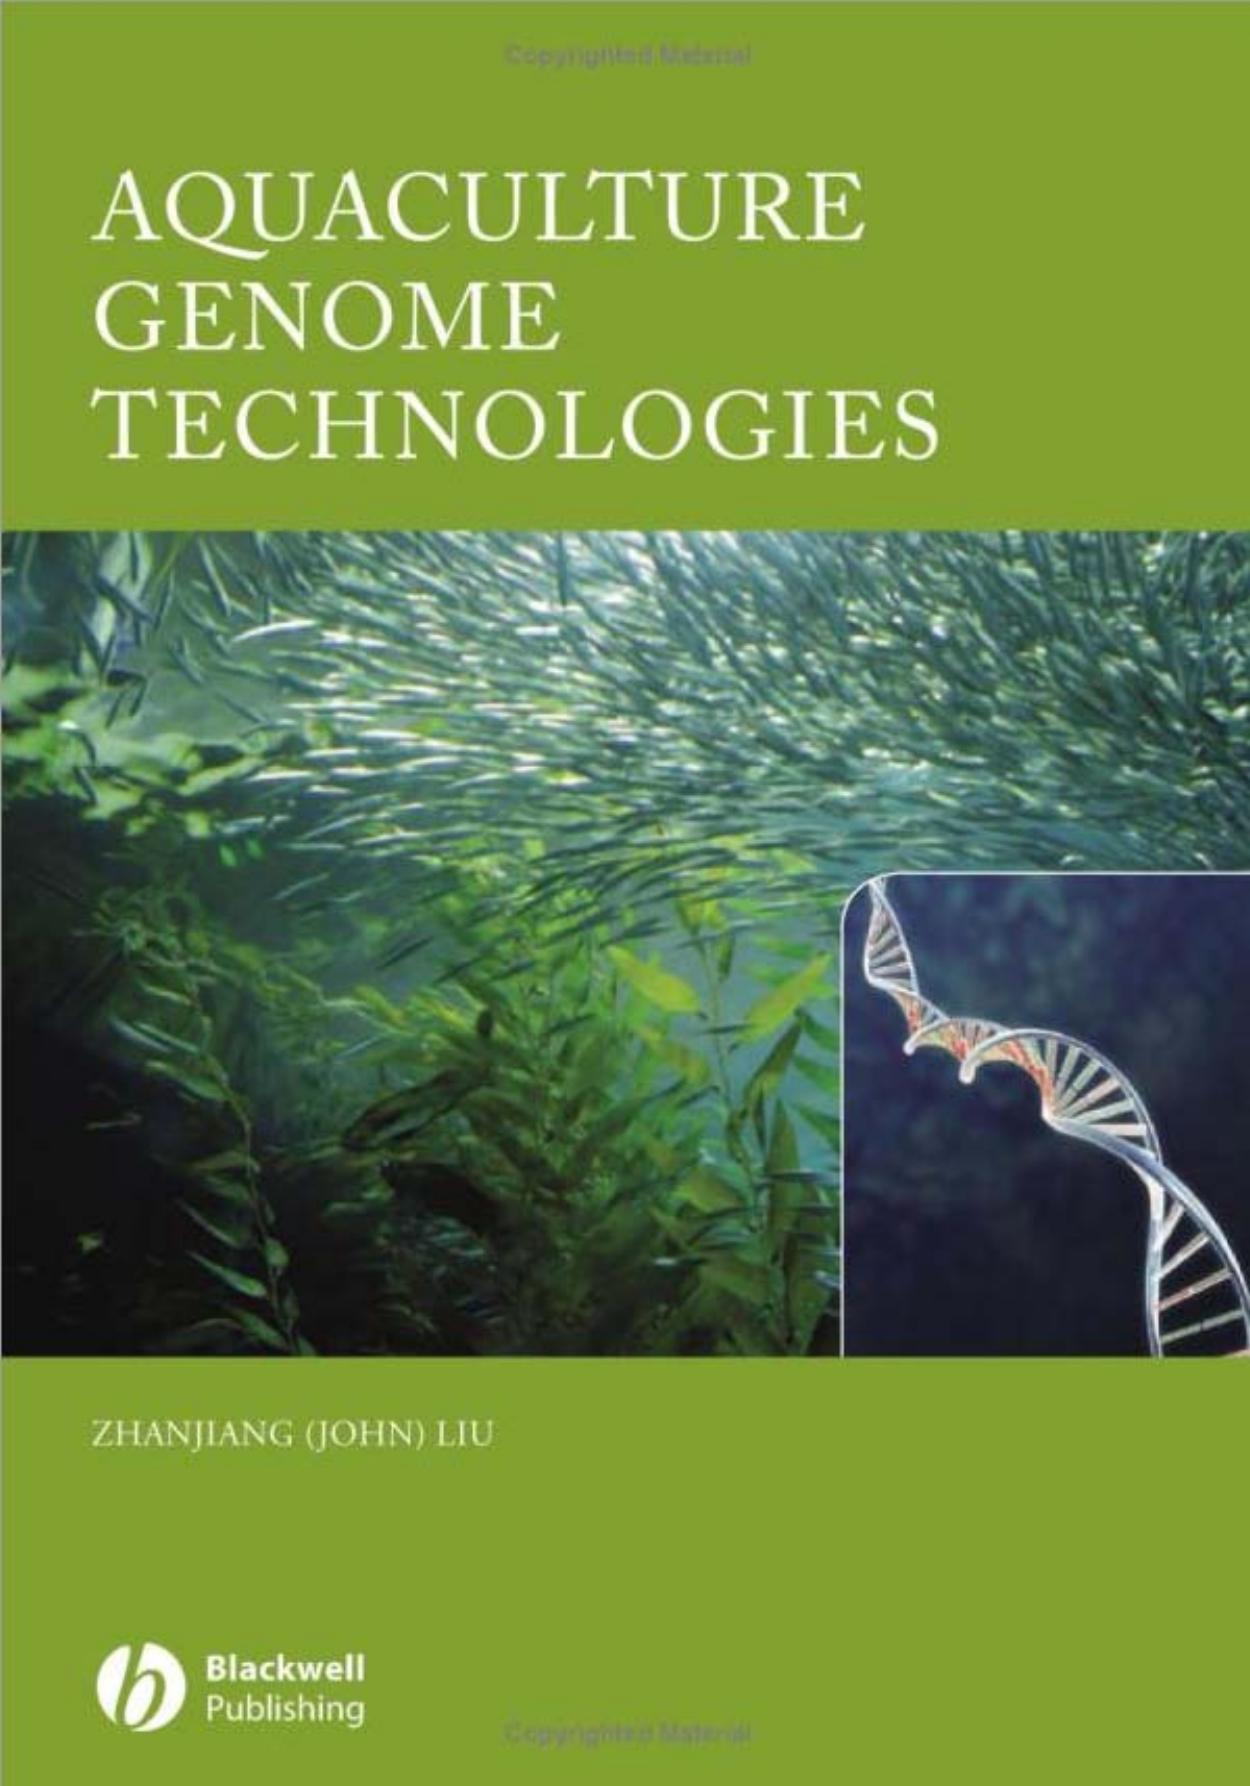 Aquaculture Genome Technologies-Wiley-Blackwell (2007)